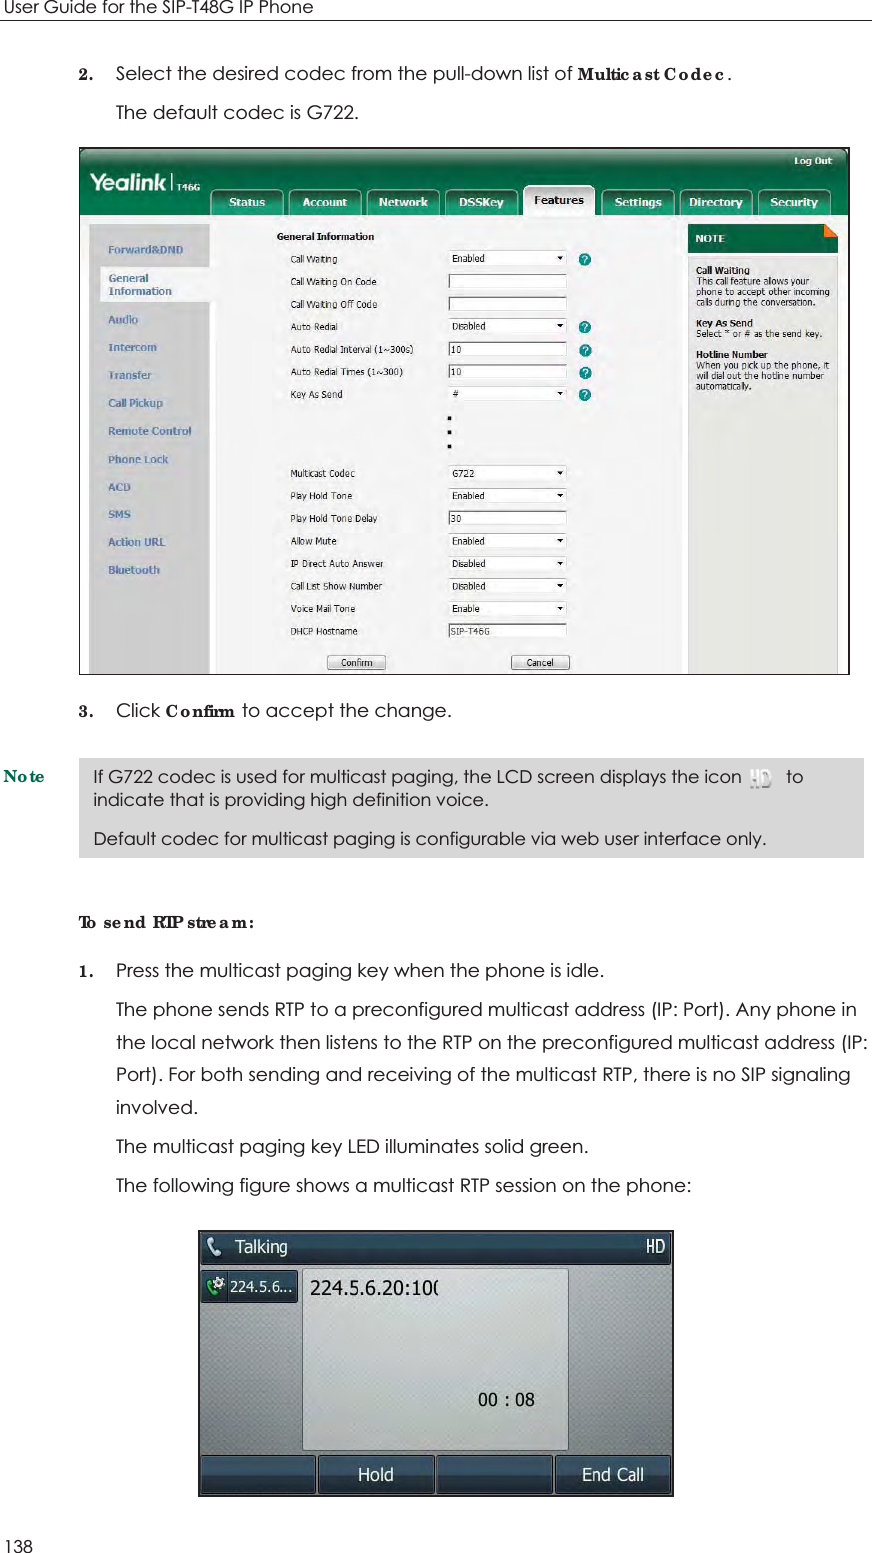 User Guide for the SIP-T48G IP Phone 138 2. Select the desired codec from the pull-down list of Multicast Codec. The default codec is G722.  3. Click Confirm to accept the change. NoteTo send RTP stream: 1. Press the multicast paging key when the phone is idle. The phone sends RTP to a preconfigured multicast address (IP: Port). Any phone in the local network then listens to the RTP on the preconfigured multicast address (IP: Port). For both sending and receiving of the multicast RTP, there is no SIP signaling involved. The multicast paging key LED illuminates solid green. The following figure shows a multicast RTP session on the phone:  If G722 codec is used for multicast paging, the LCD screen displays the icon          to indicate that is providing high definition voice. Default codec for multicast paging is configurable via web user interface only.